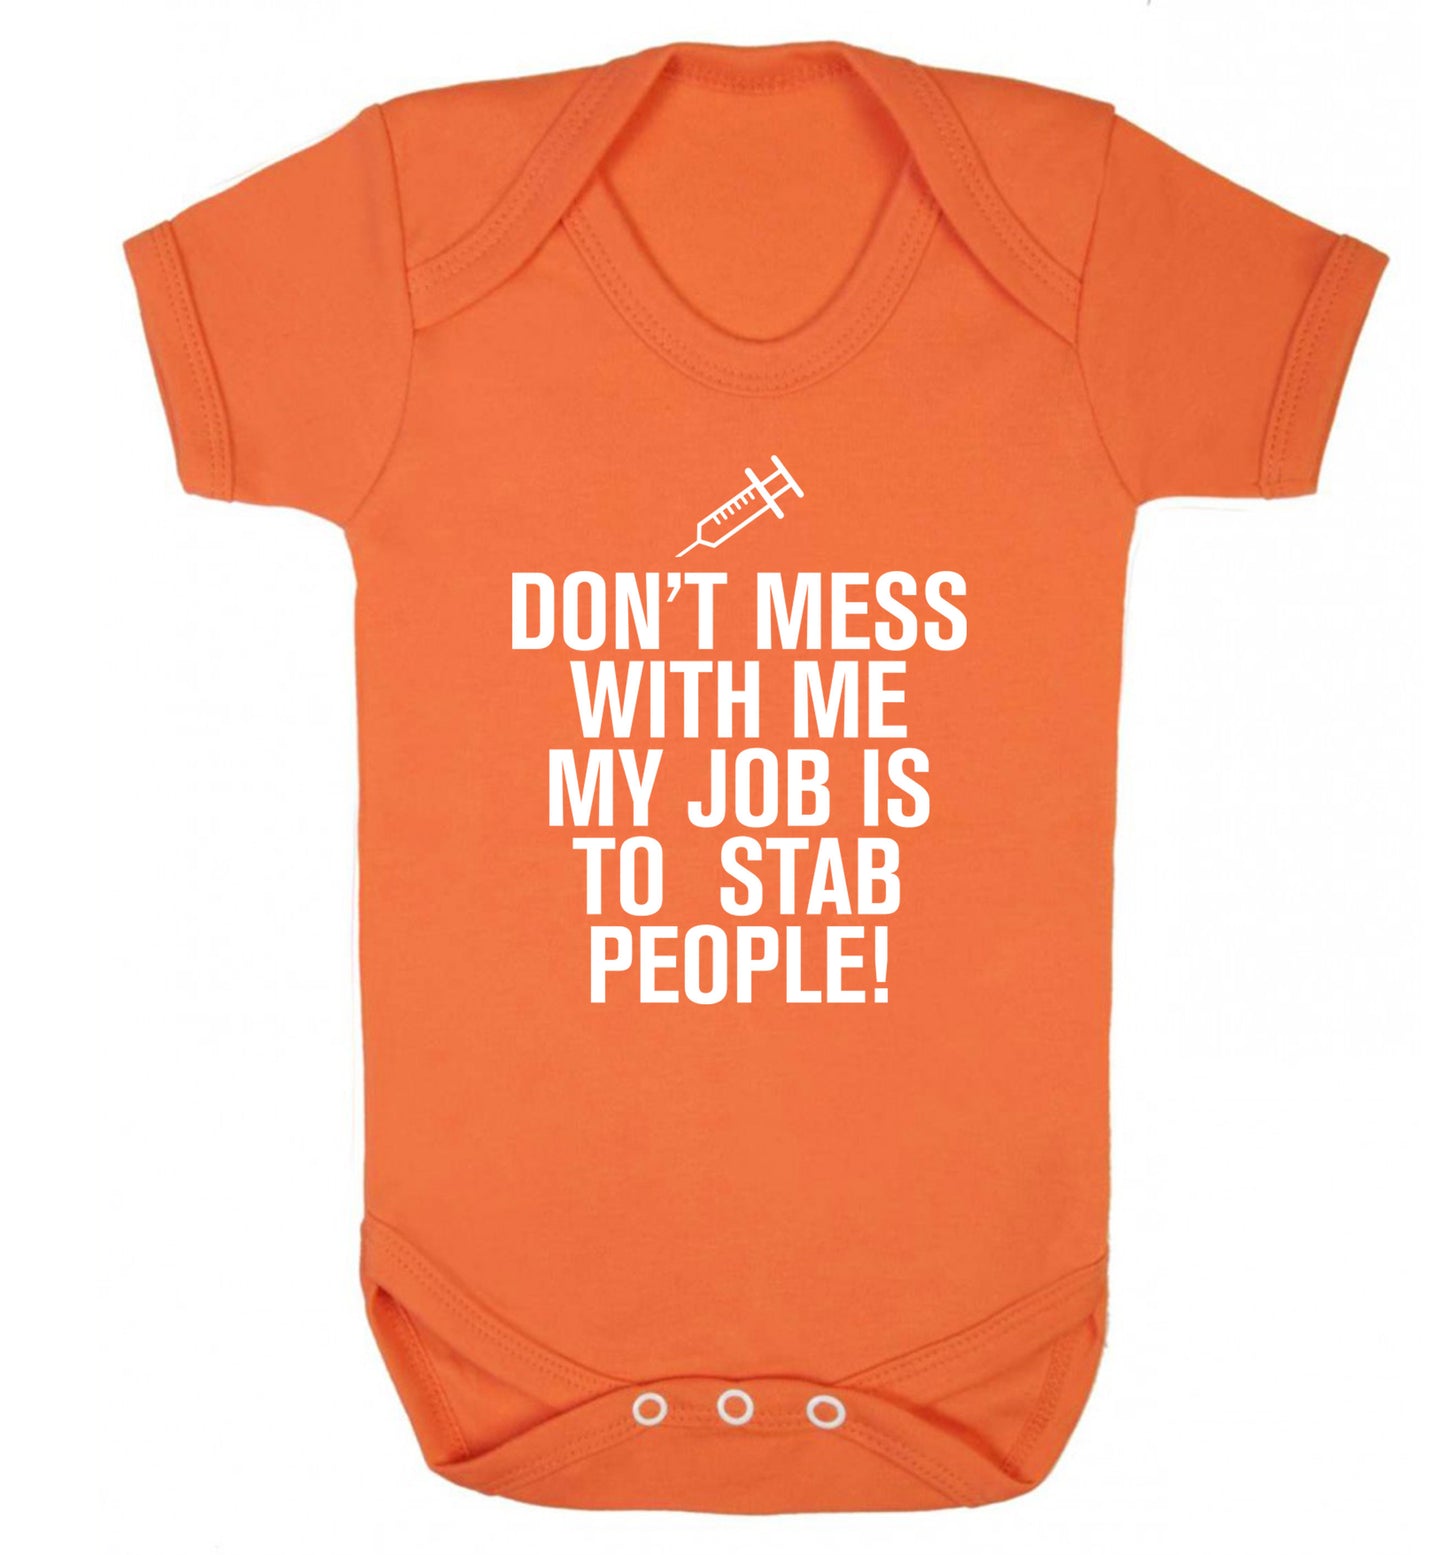 Don't mess with me my job is to stab people! Baby Vest orange 18-24 months